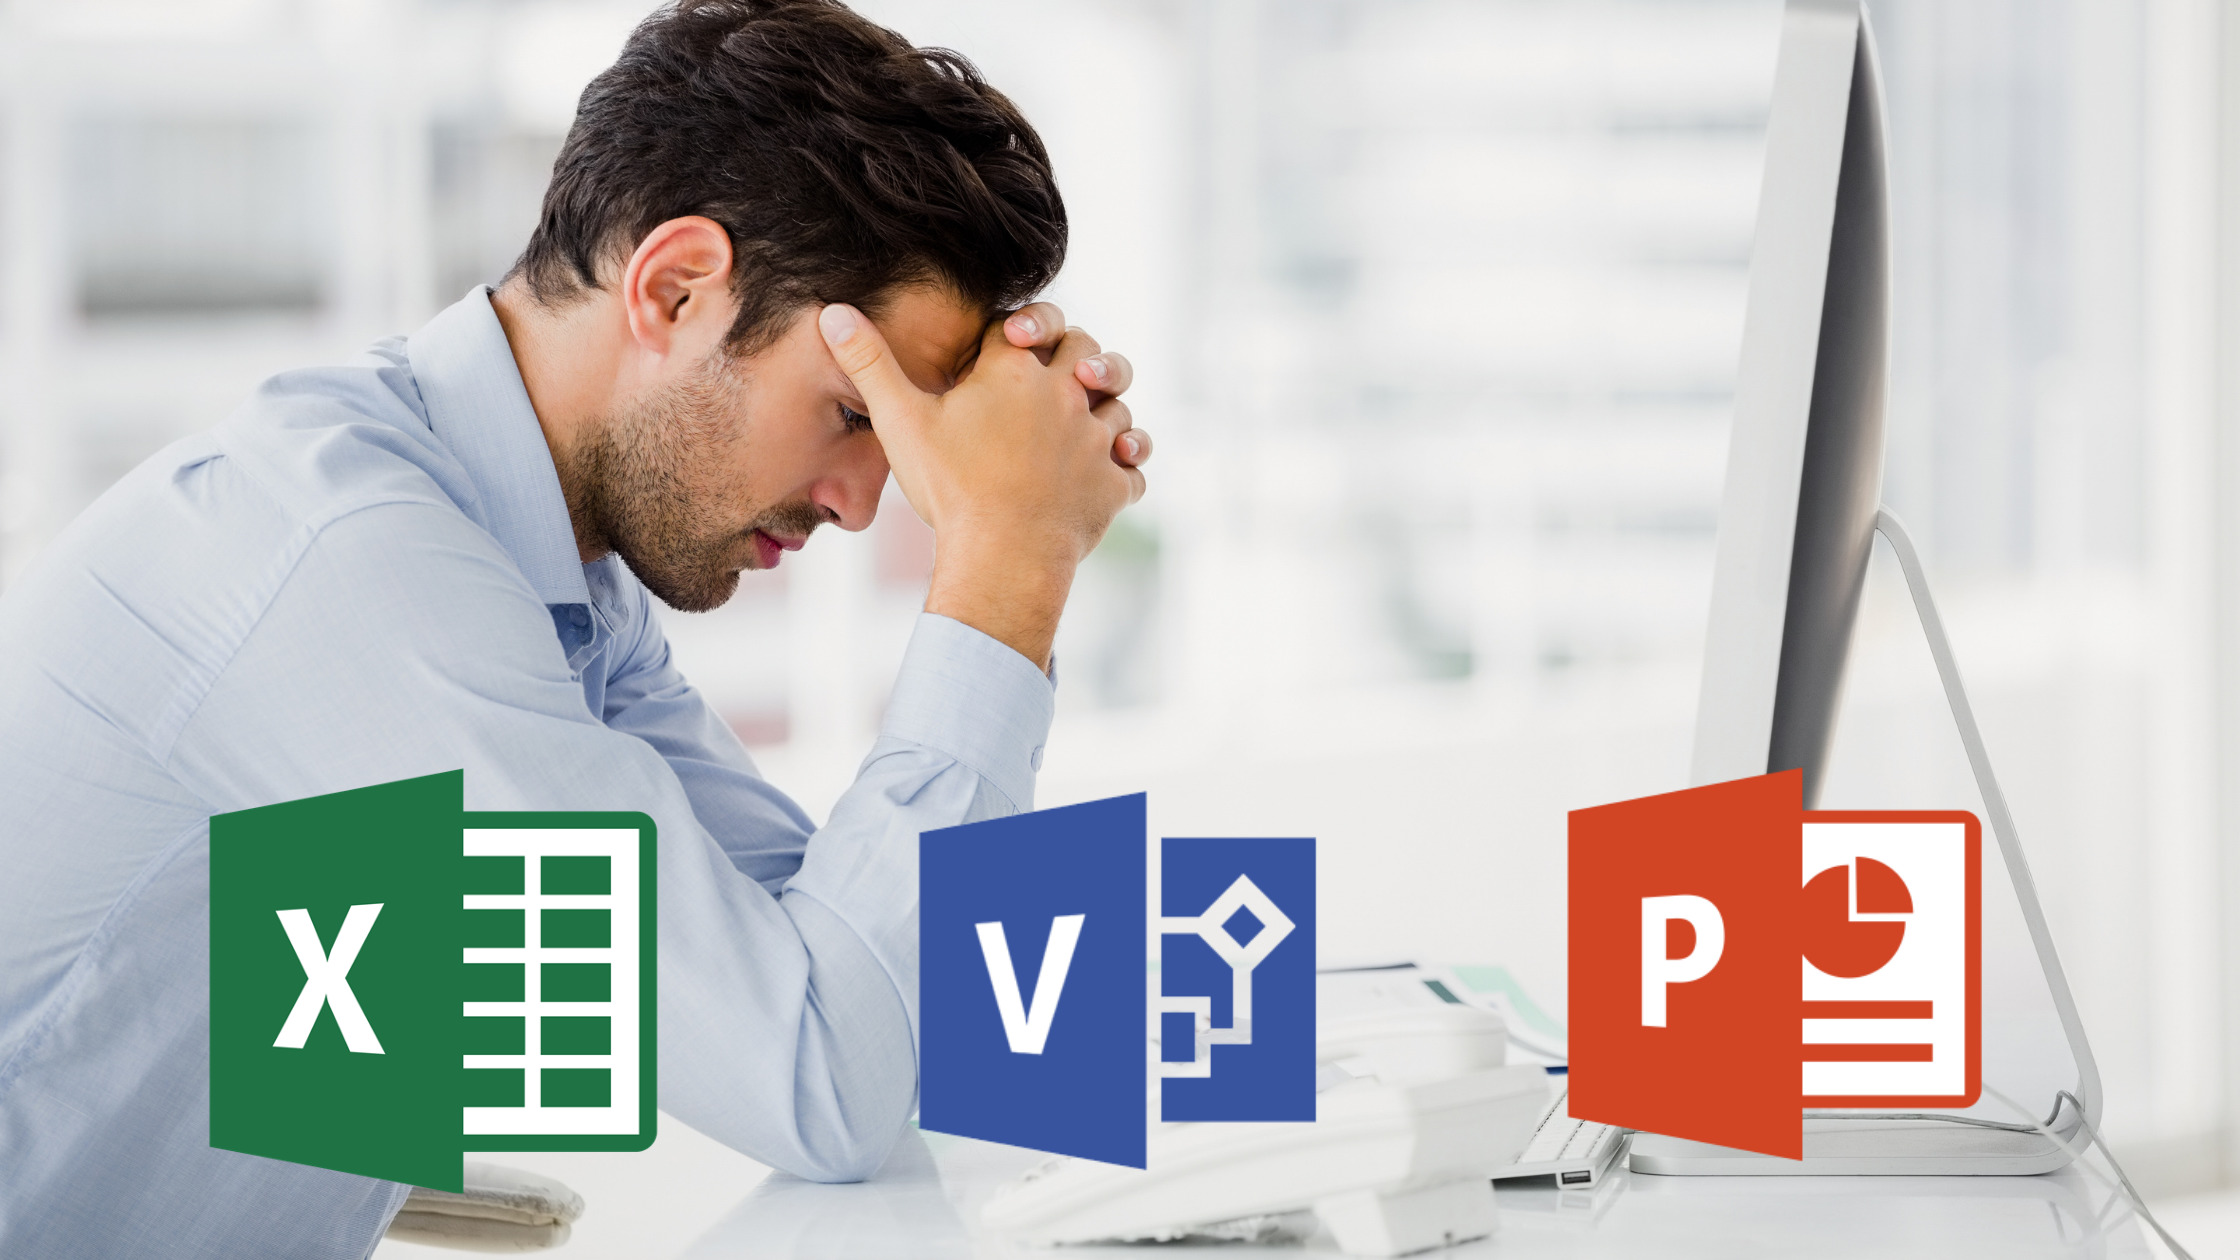 Enterprise Architecture with Excel, Visio and Powerpoint – The Recipe for Zero Business Value